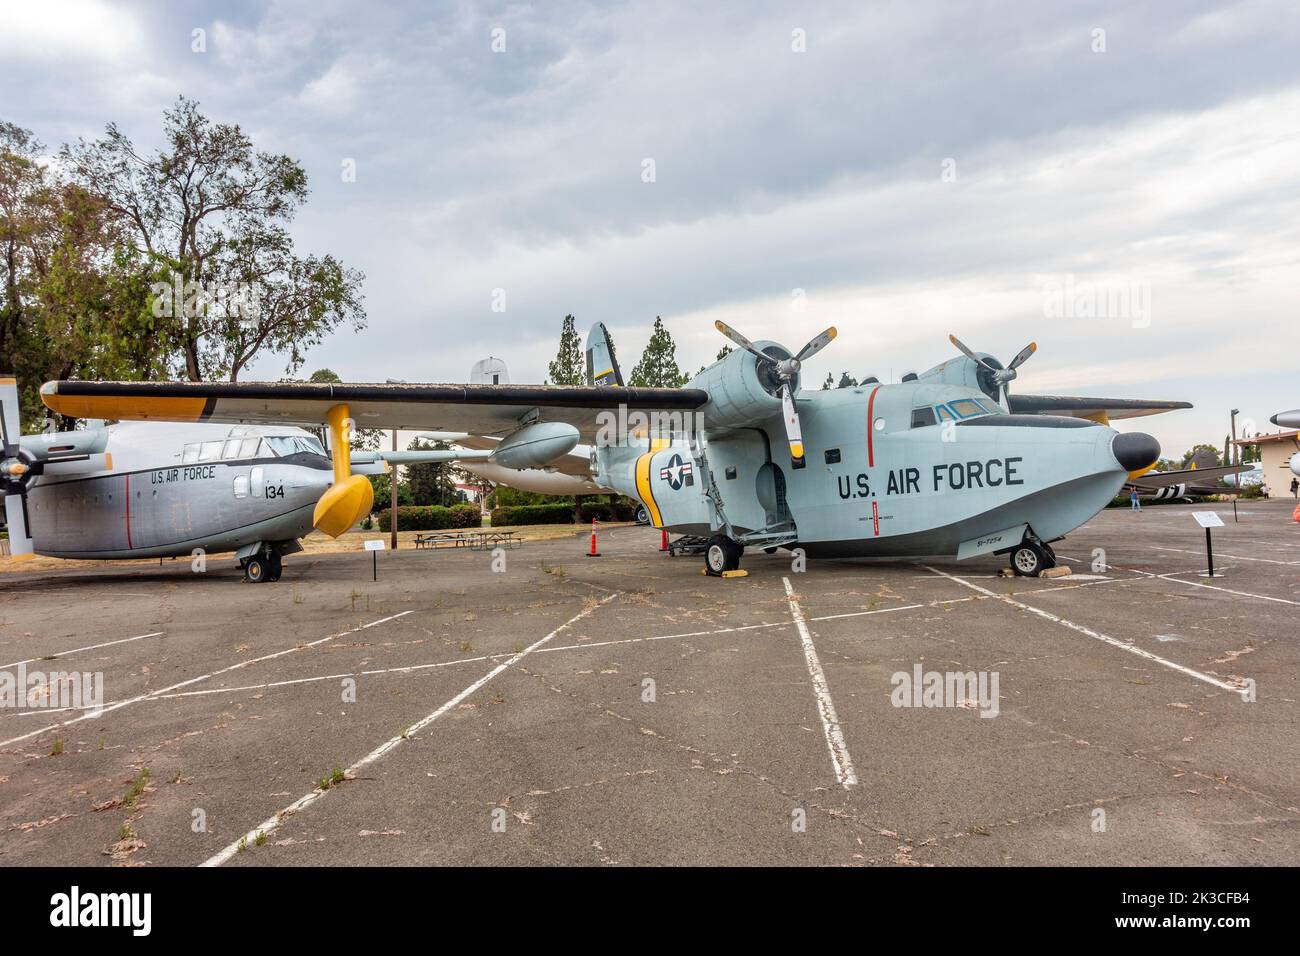 An American Grumman SA-16 Albatross amphibious search and rescue plane on display at The Travis Airforce Base in California, USA Stock Photo